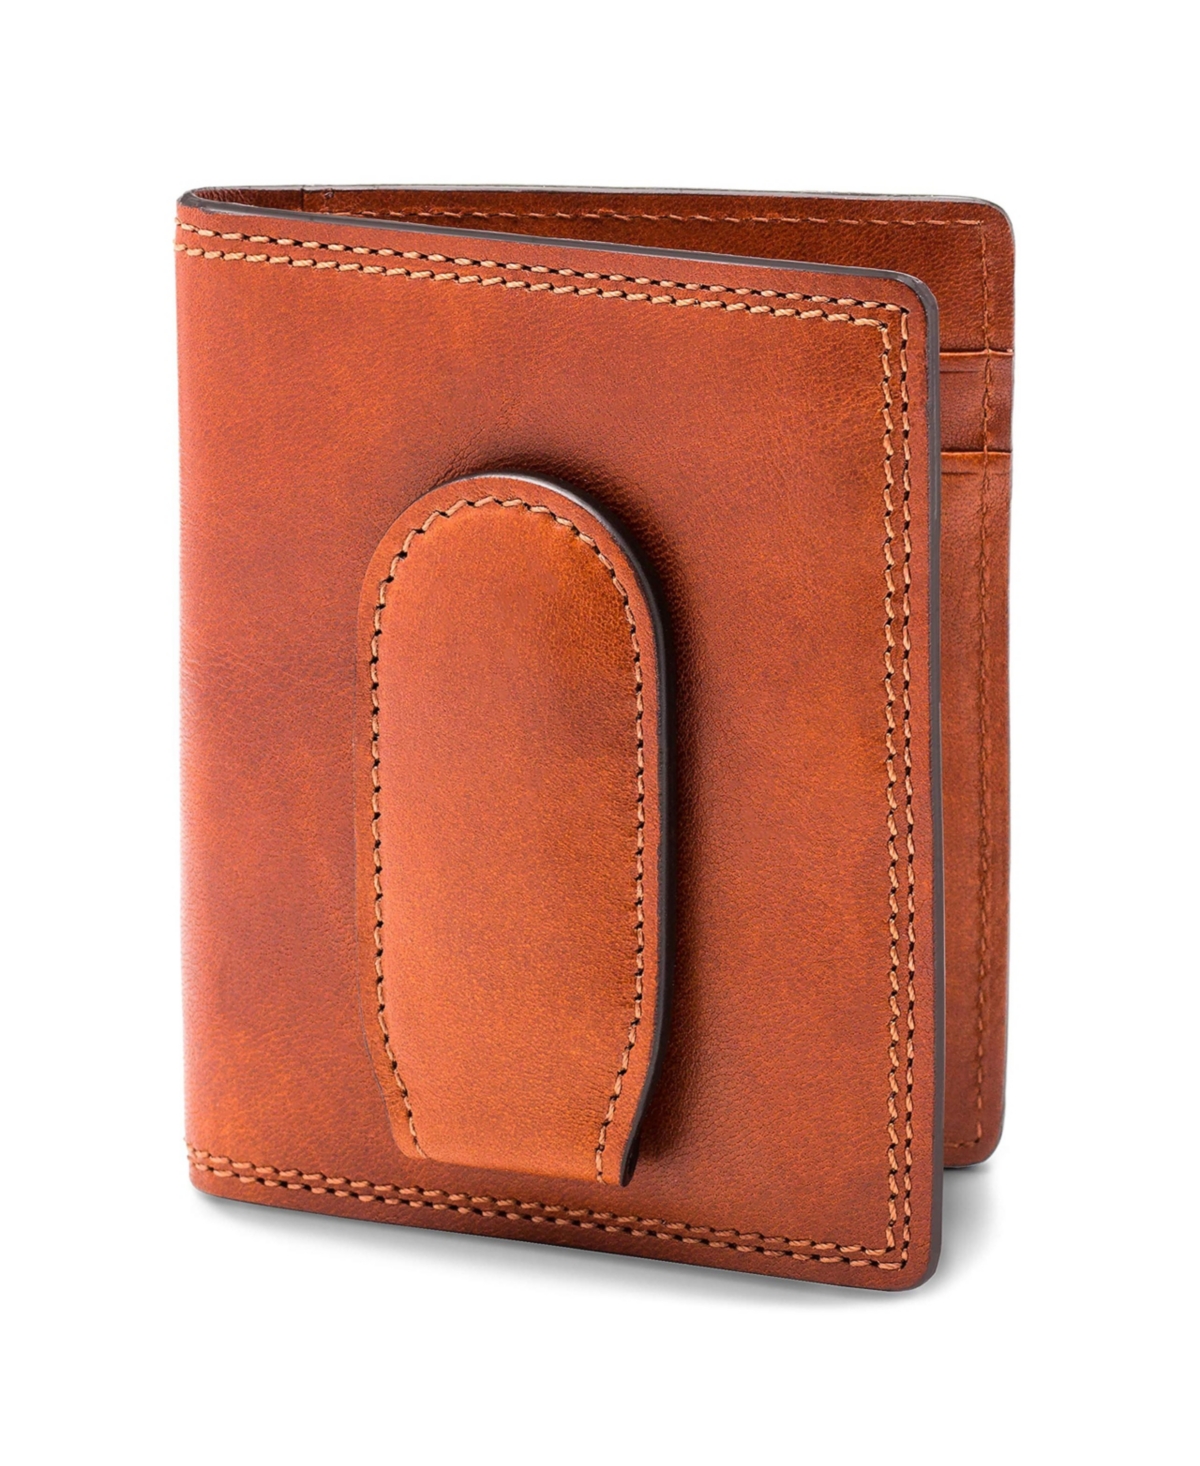 Men's Wallet, Dolce Leather Front Pocket Bifold Wallet with Magnetic Clip - Amber